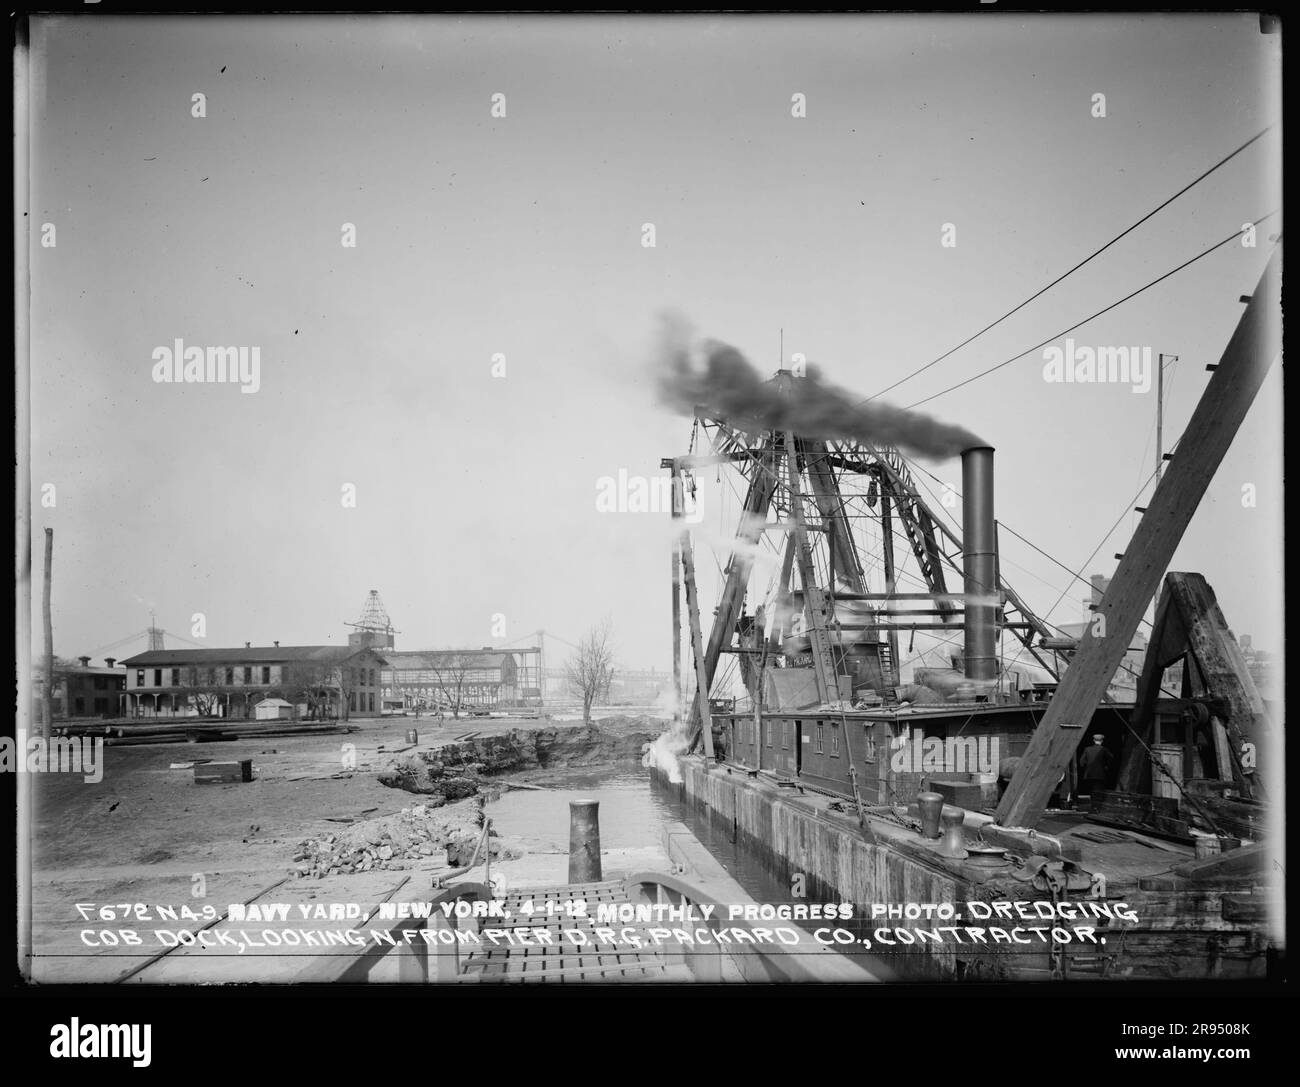 Monthly Progress Photo, Dredging Cob Dock, Looking North from Pier D, R. G. Packard Company, Contractor. Glass Plate Negatives of the Construction and Repair of Buildings, Facilities, and Vessels at the New York Navy Yard. Stock Photo